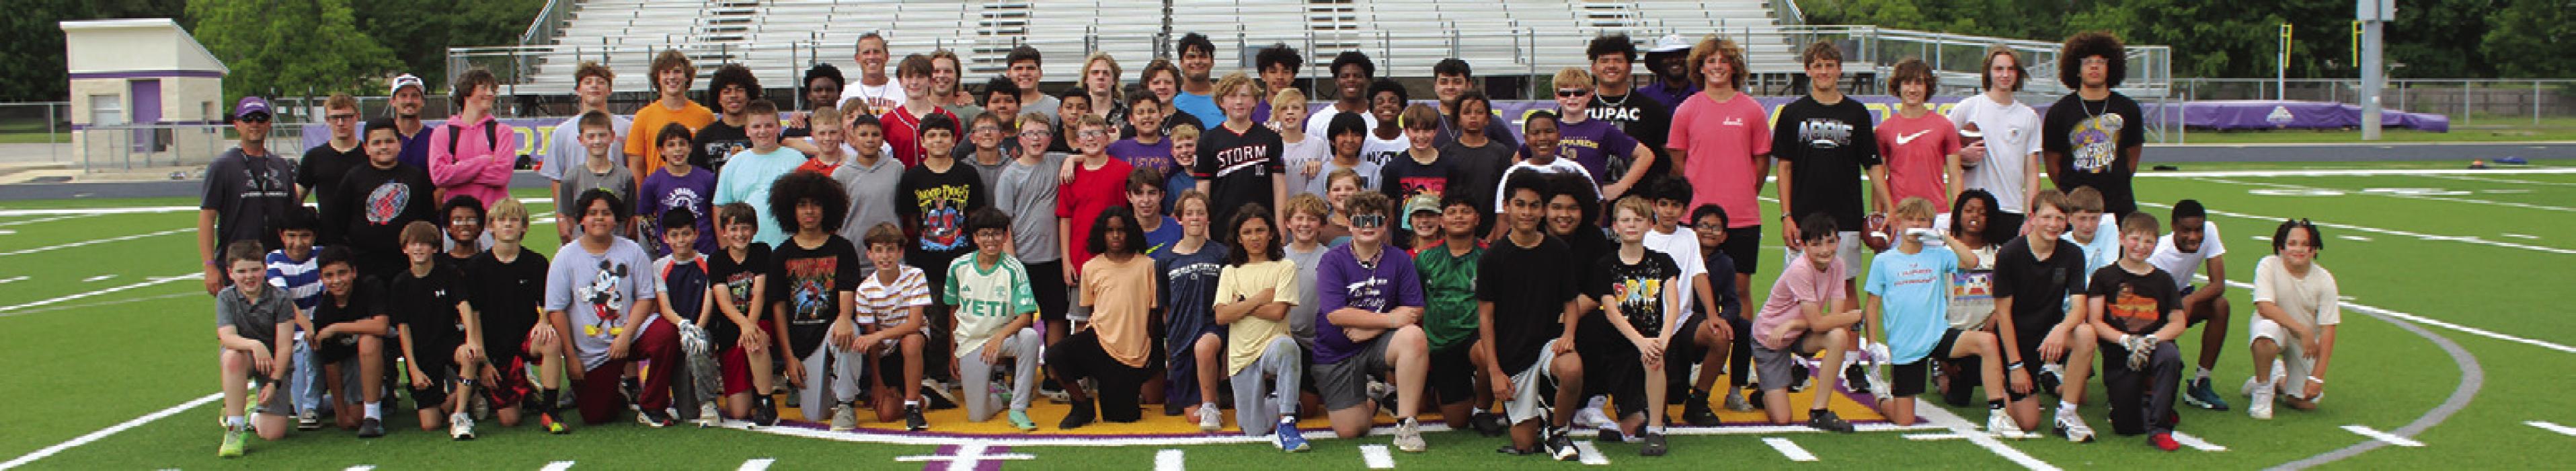 Last week an after-school 7-on-7 football league for 5th and 6th graders, coached by current Leopard high school football players, began at Leopard Stadium. Here are the campers during a break in the action. The camp concludes this week. Photo by Jeff Wick